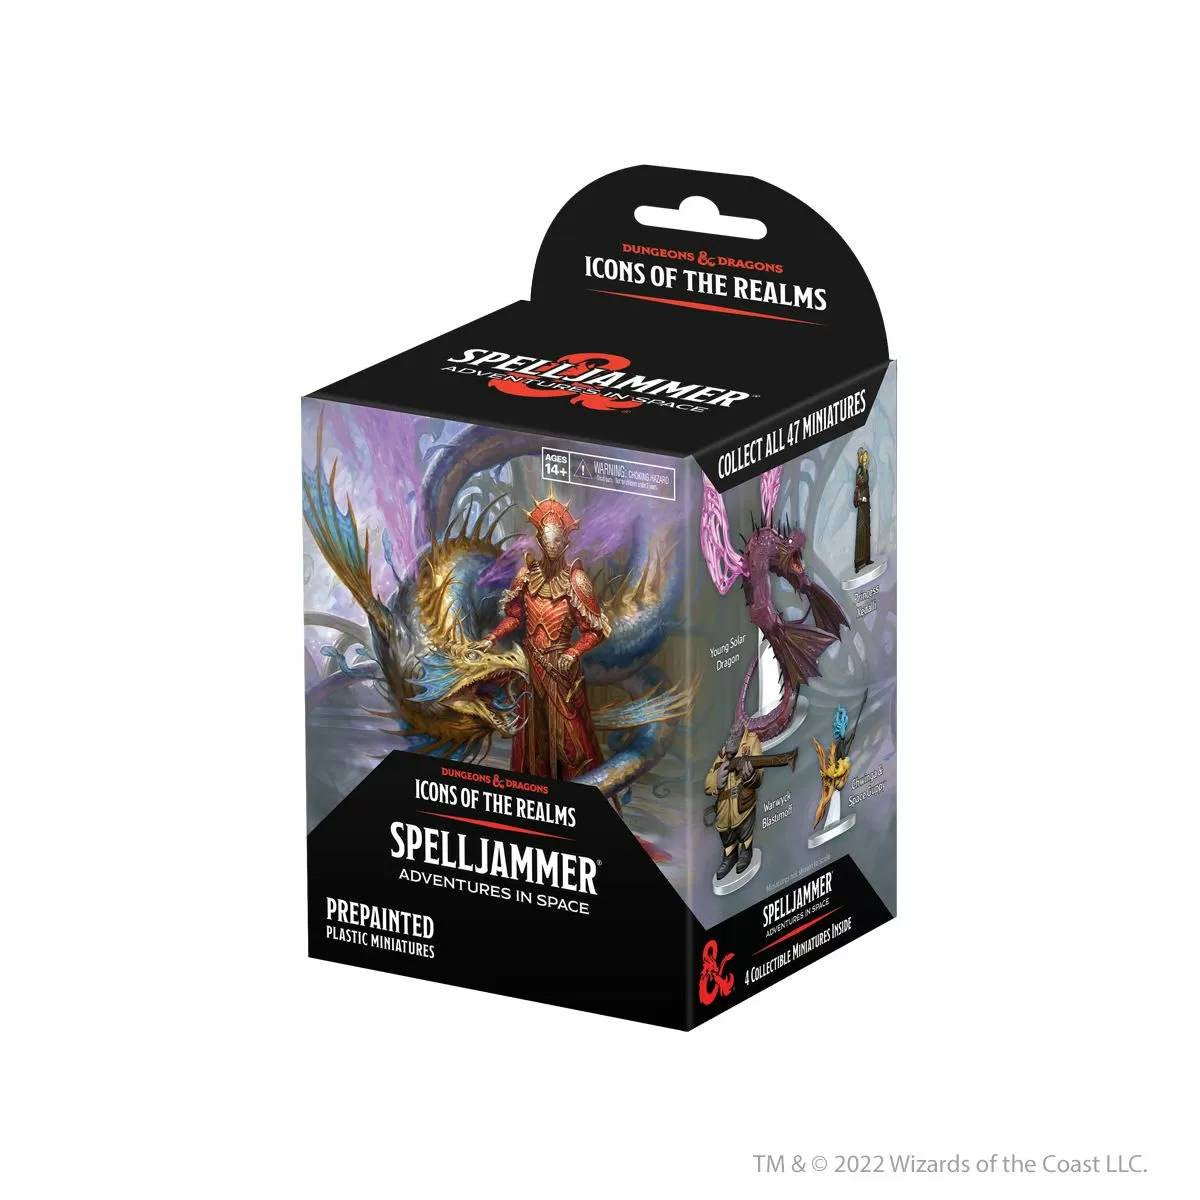 SpellJammer Adventures in Space - Booster Box - D&D - Icons of the Realm Minis